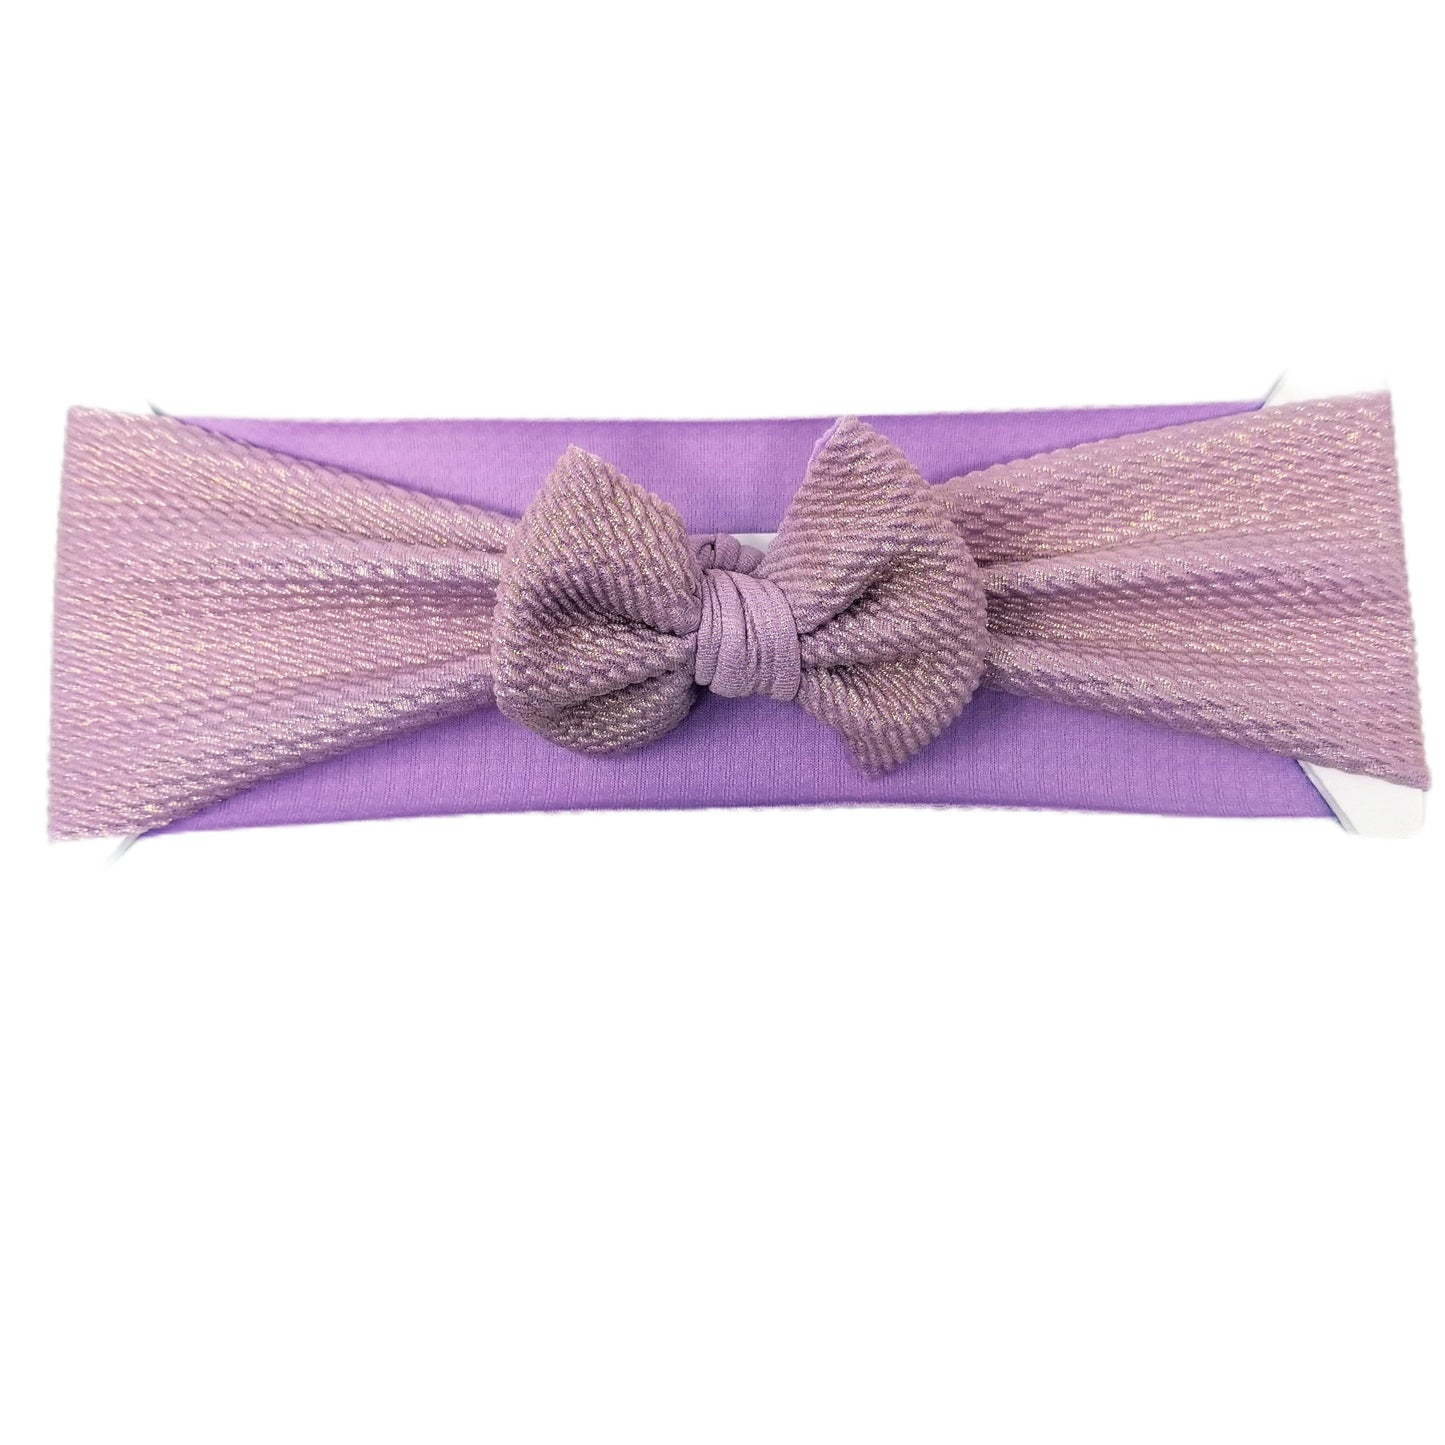 3 inch Lavender Shimmer Fabric Bow Headwrap